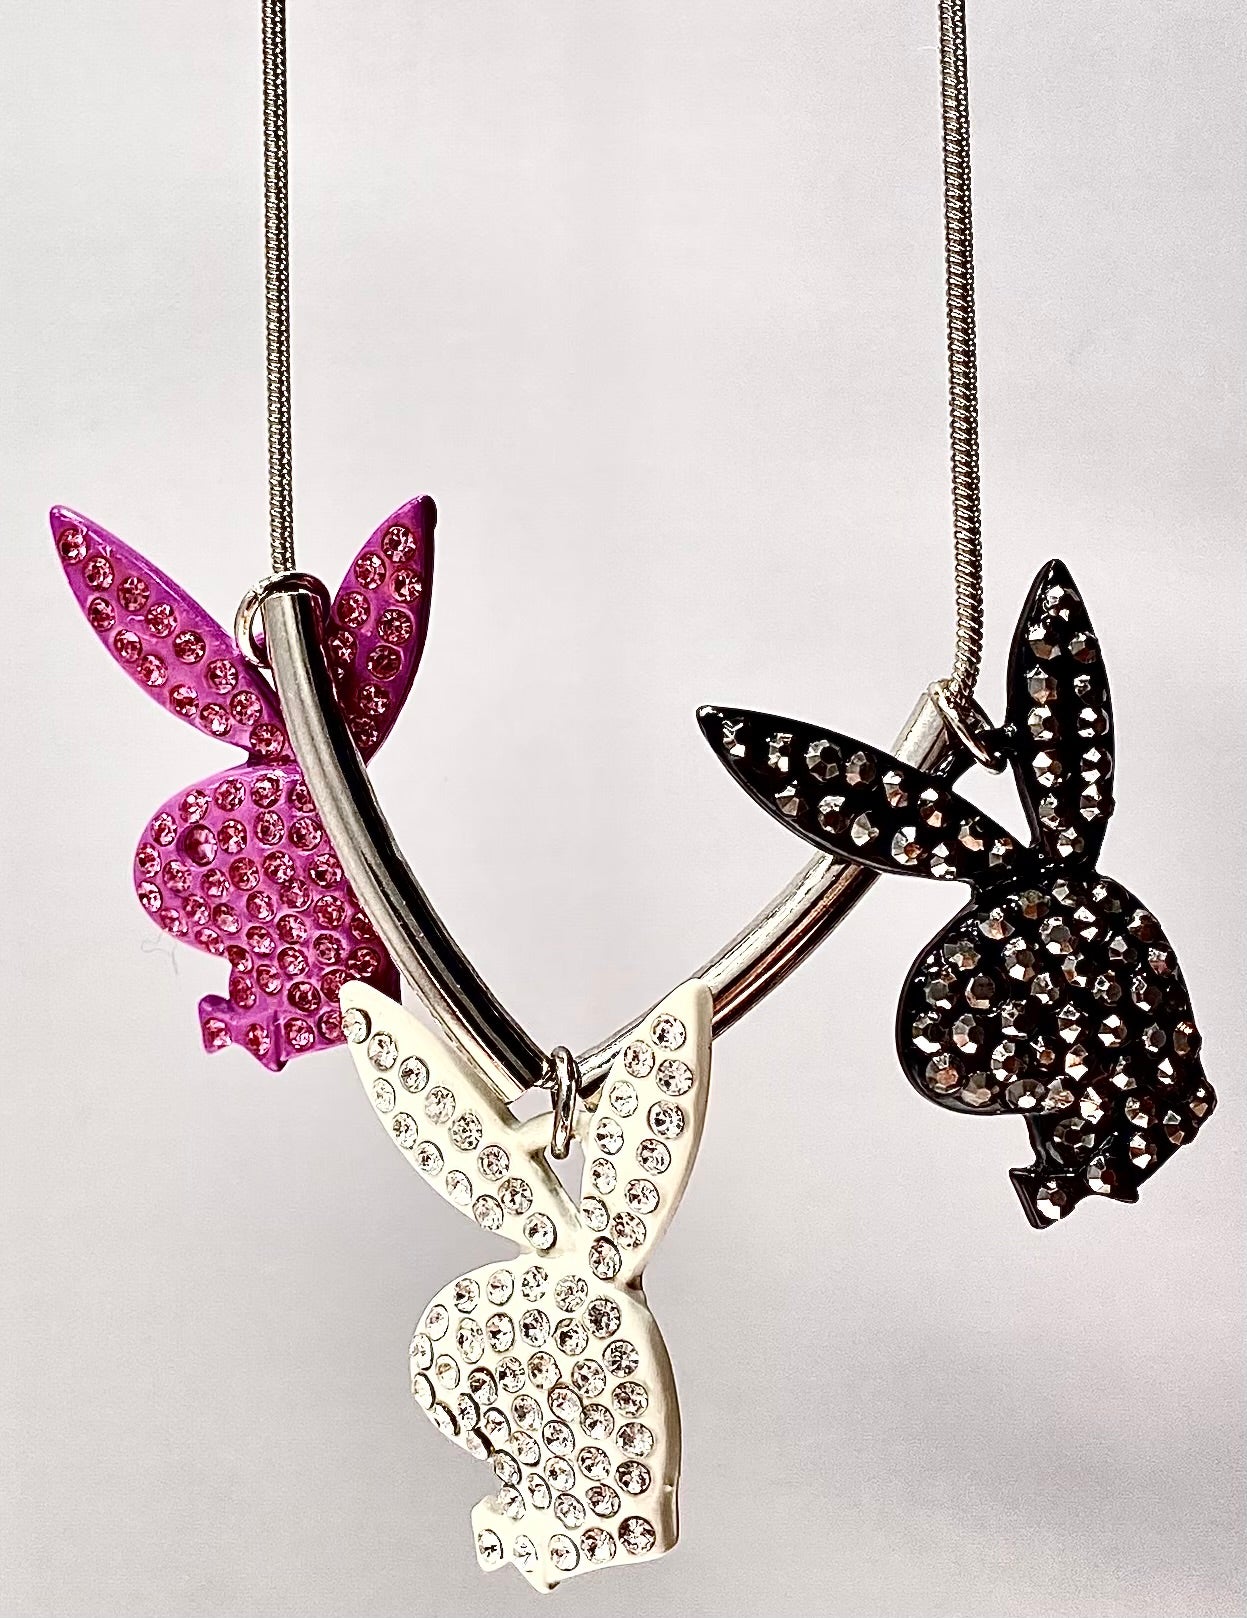 Playboy Crystal Bunny Heads in Pink White Black Charm Necklace